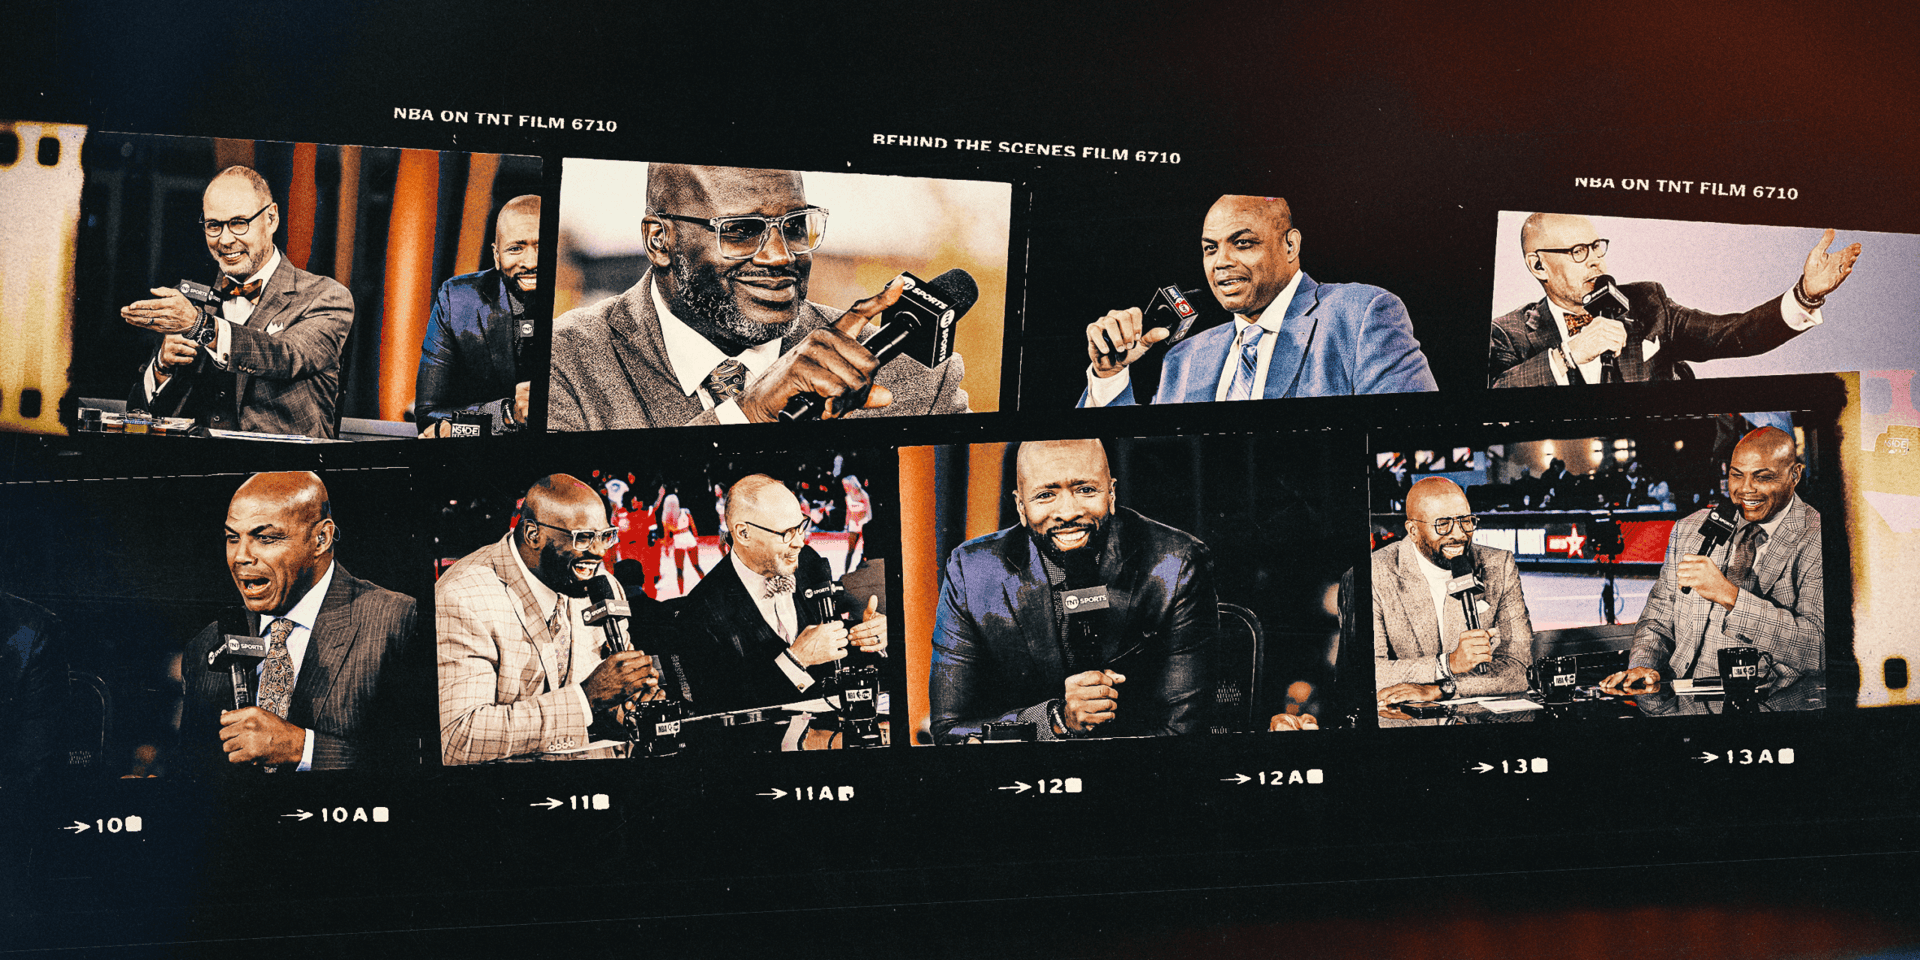 Amid television uncertainty, 'Inside the NBA' continues to be an entertainment blueprint